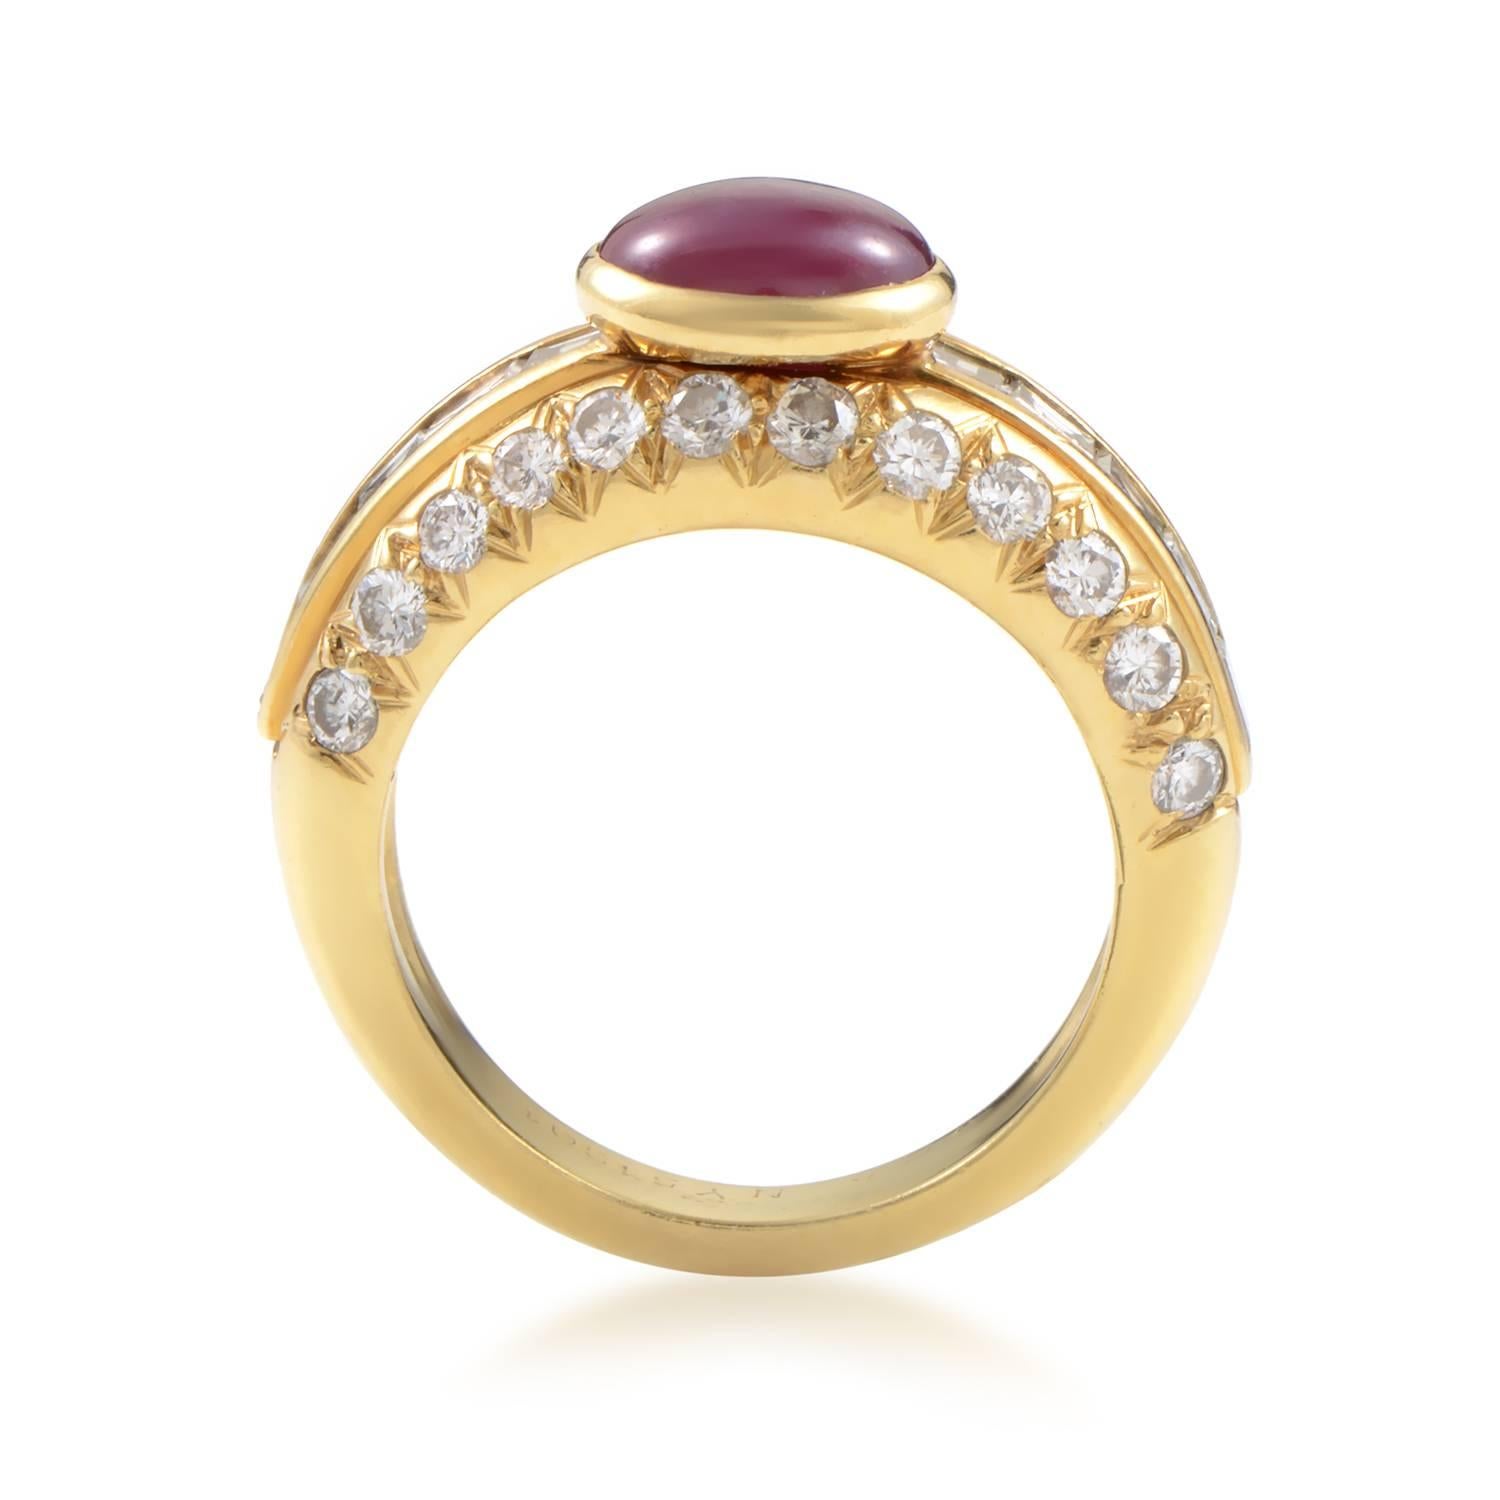 This classic design from Van Cleef & Arpels is absolutely divine. The ring is made of 18K yellow gold, and boasts a gorgeous ruby cabochon main stone, weighing in total 2ct. Lastly, the shanks are set with 1.25ct of diamonds.
Ring Size: 5.5 (50